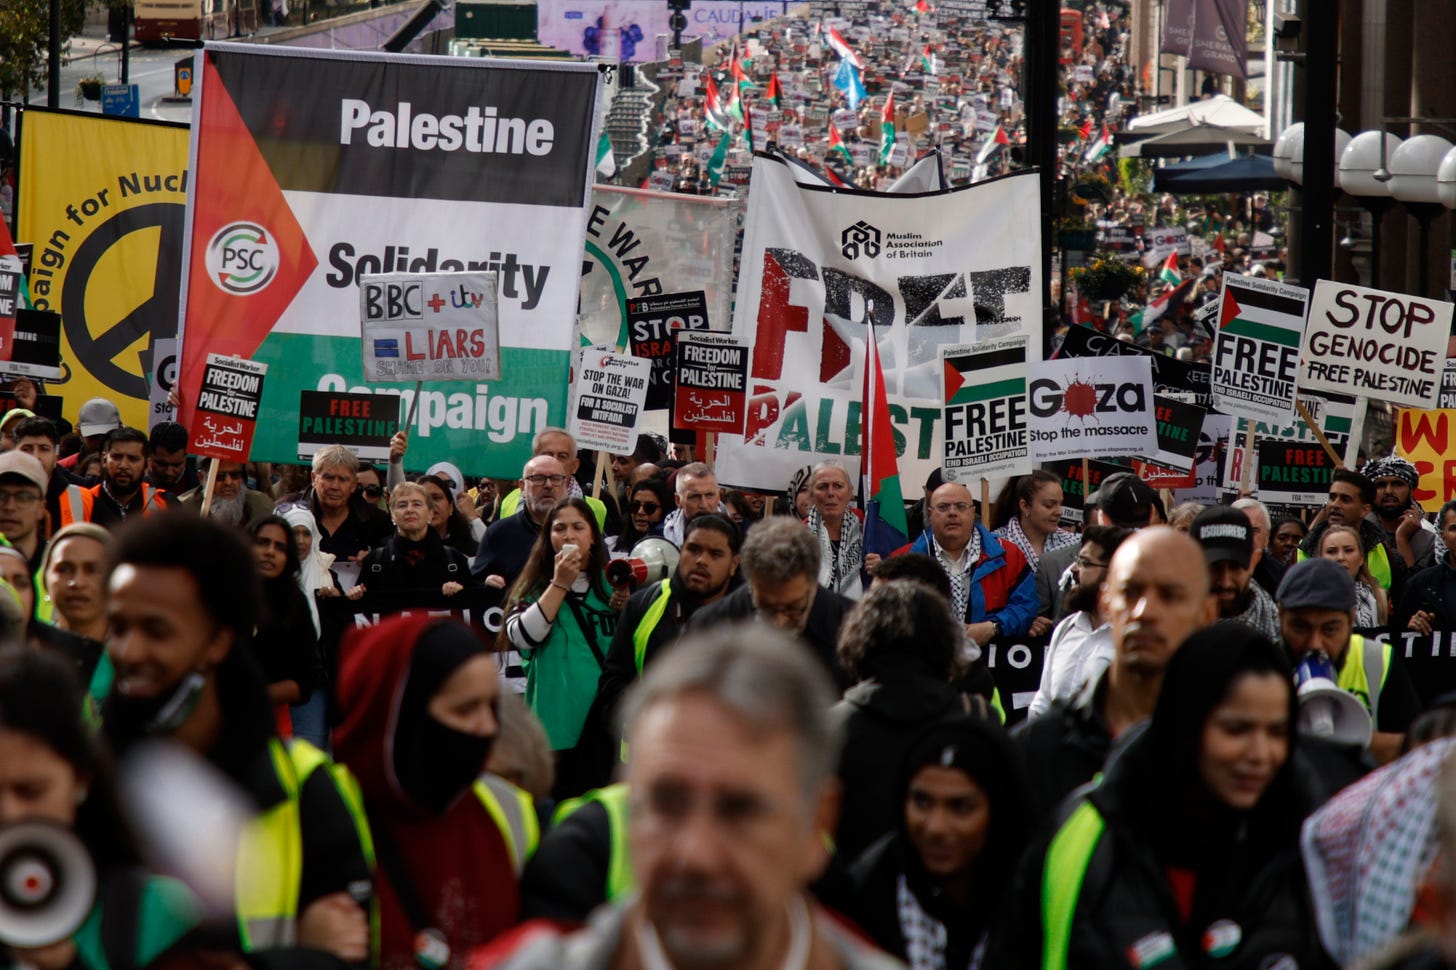 Tens of thousands of pro-Palestinian protesters march in London | AP News